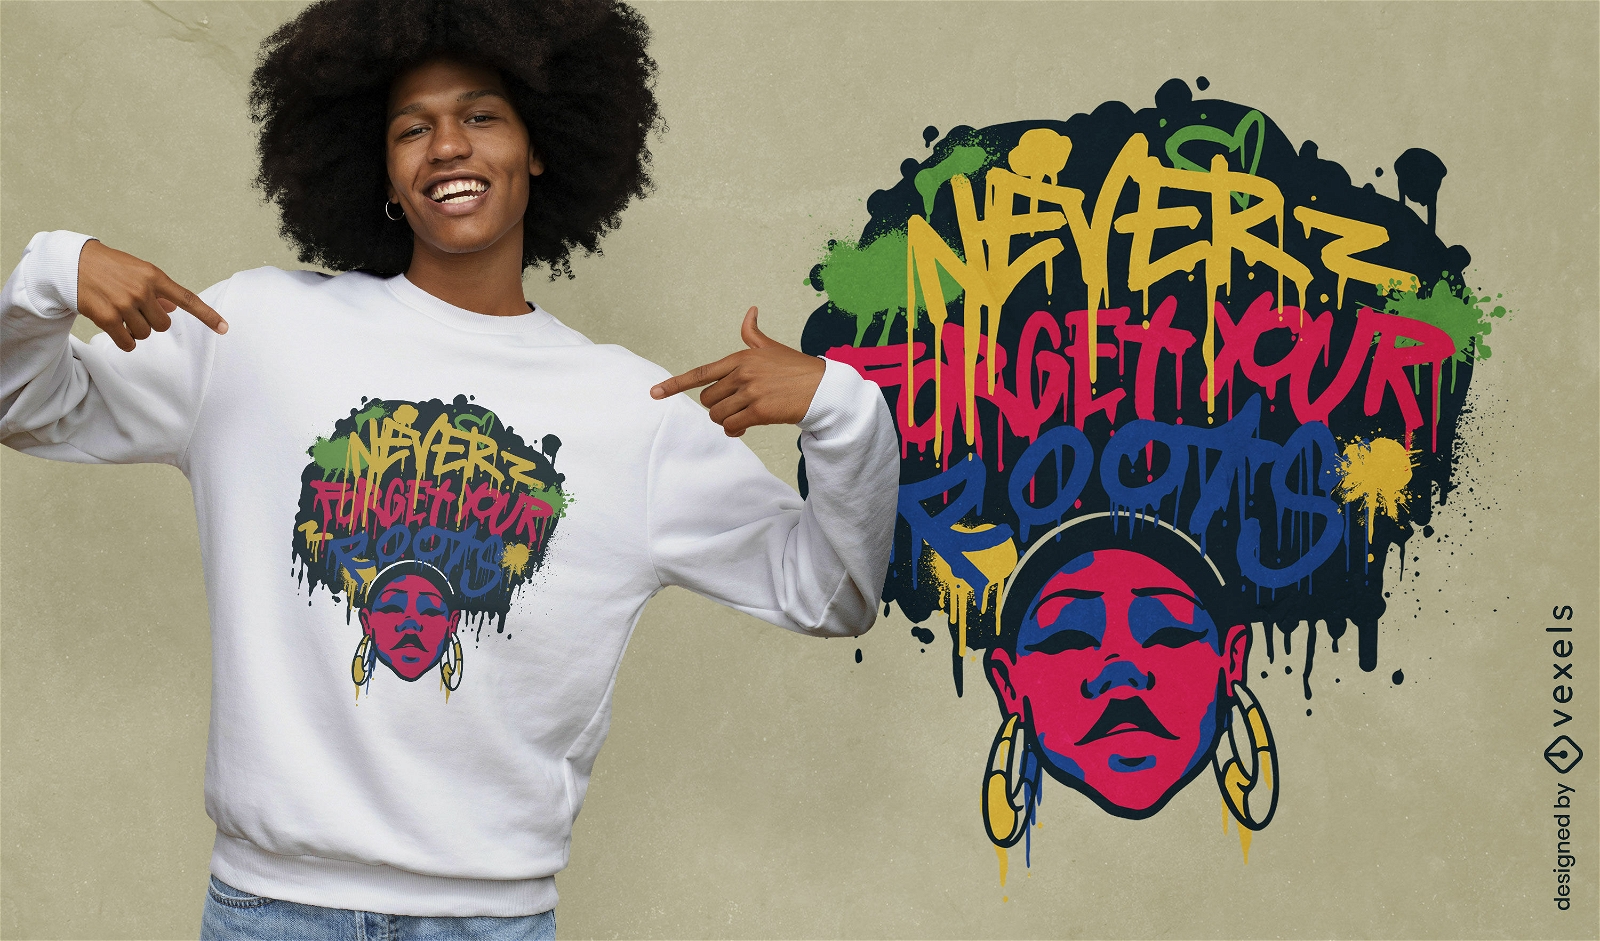 Roots black history month quote t-shirt design